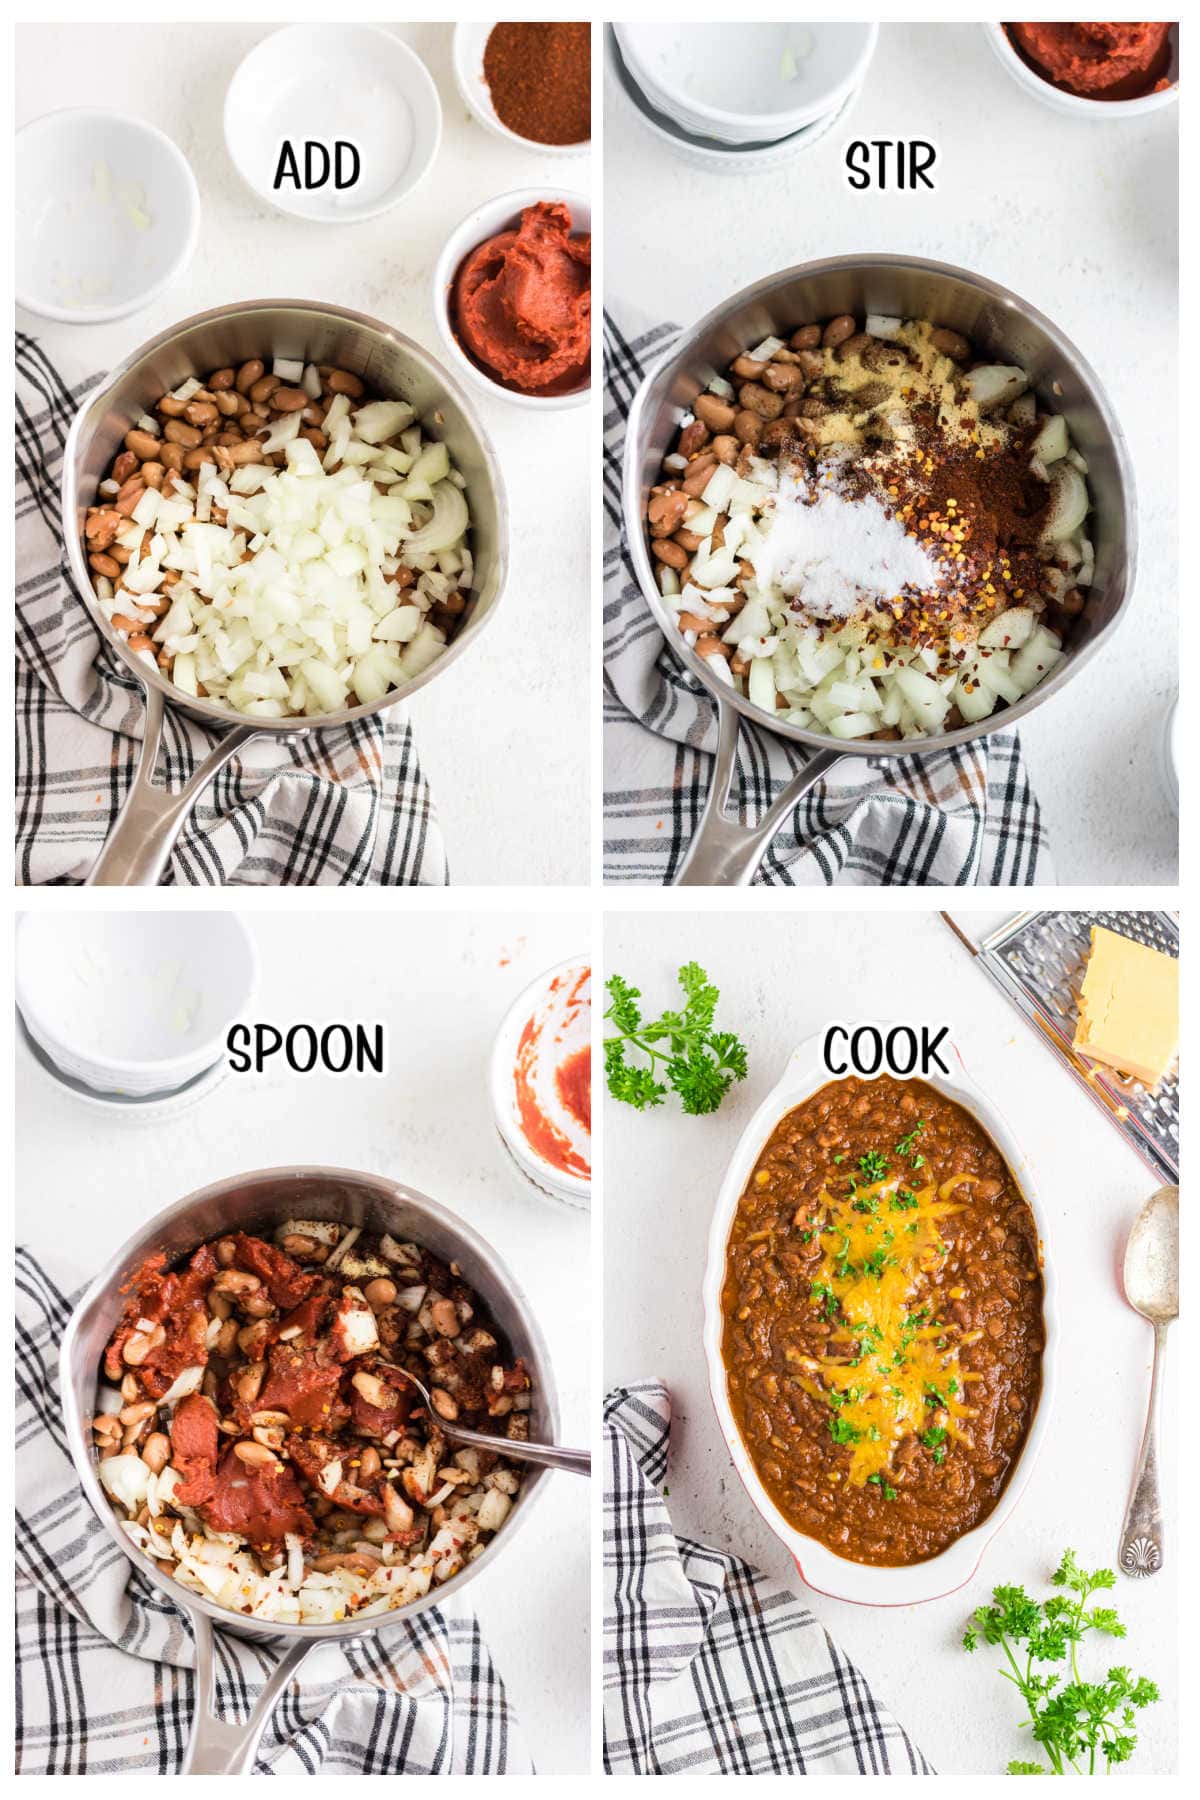 Step by step images showing how to make ranch style beans.